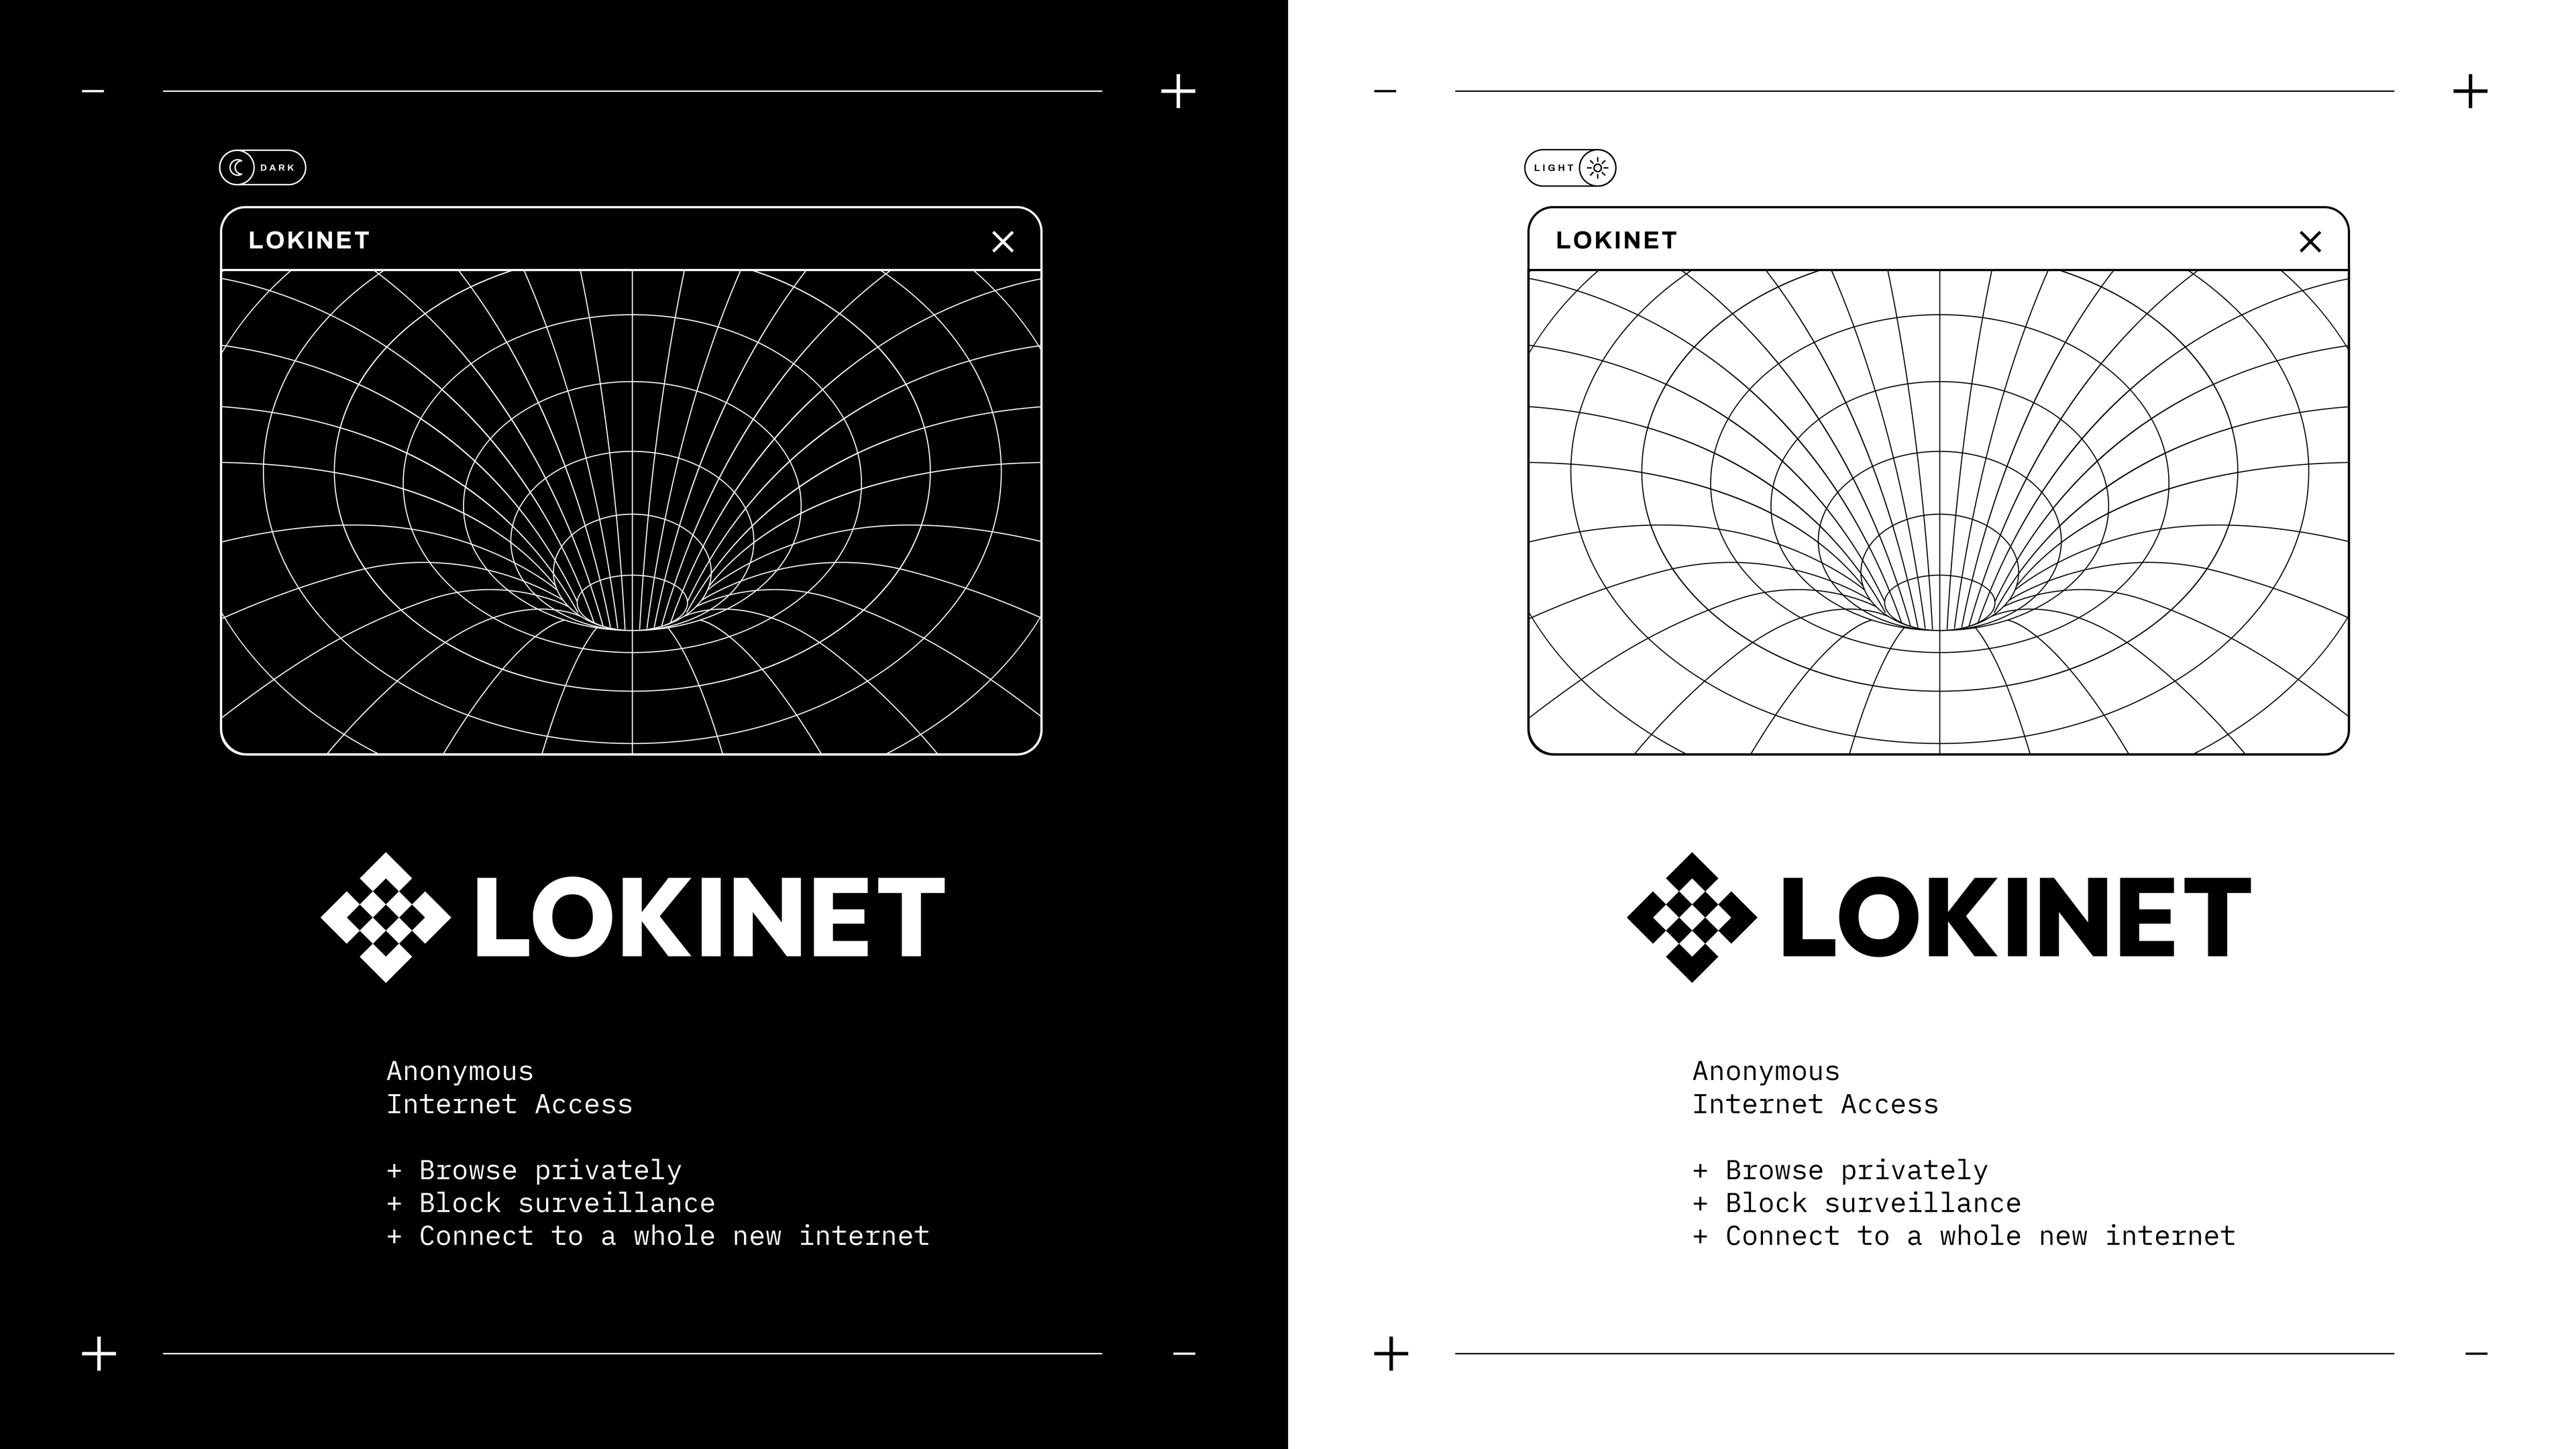 Meet the new Lokinet. Bold in black and white. Pictured are the new light modes and dark modes for the refreshed Lokinet website.